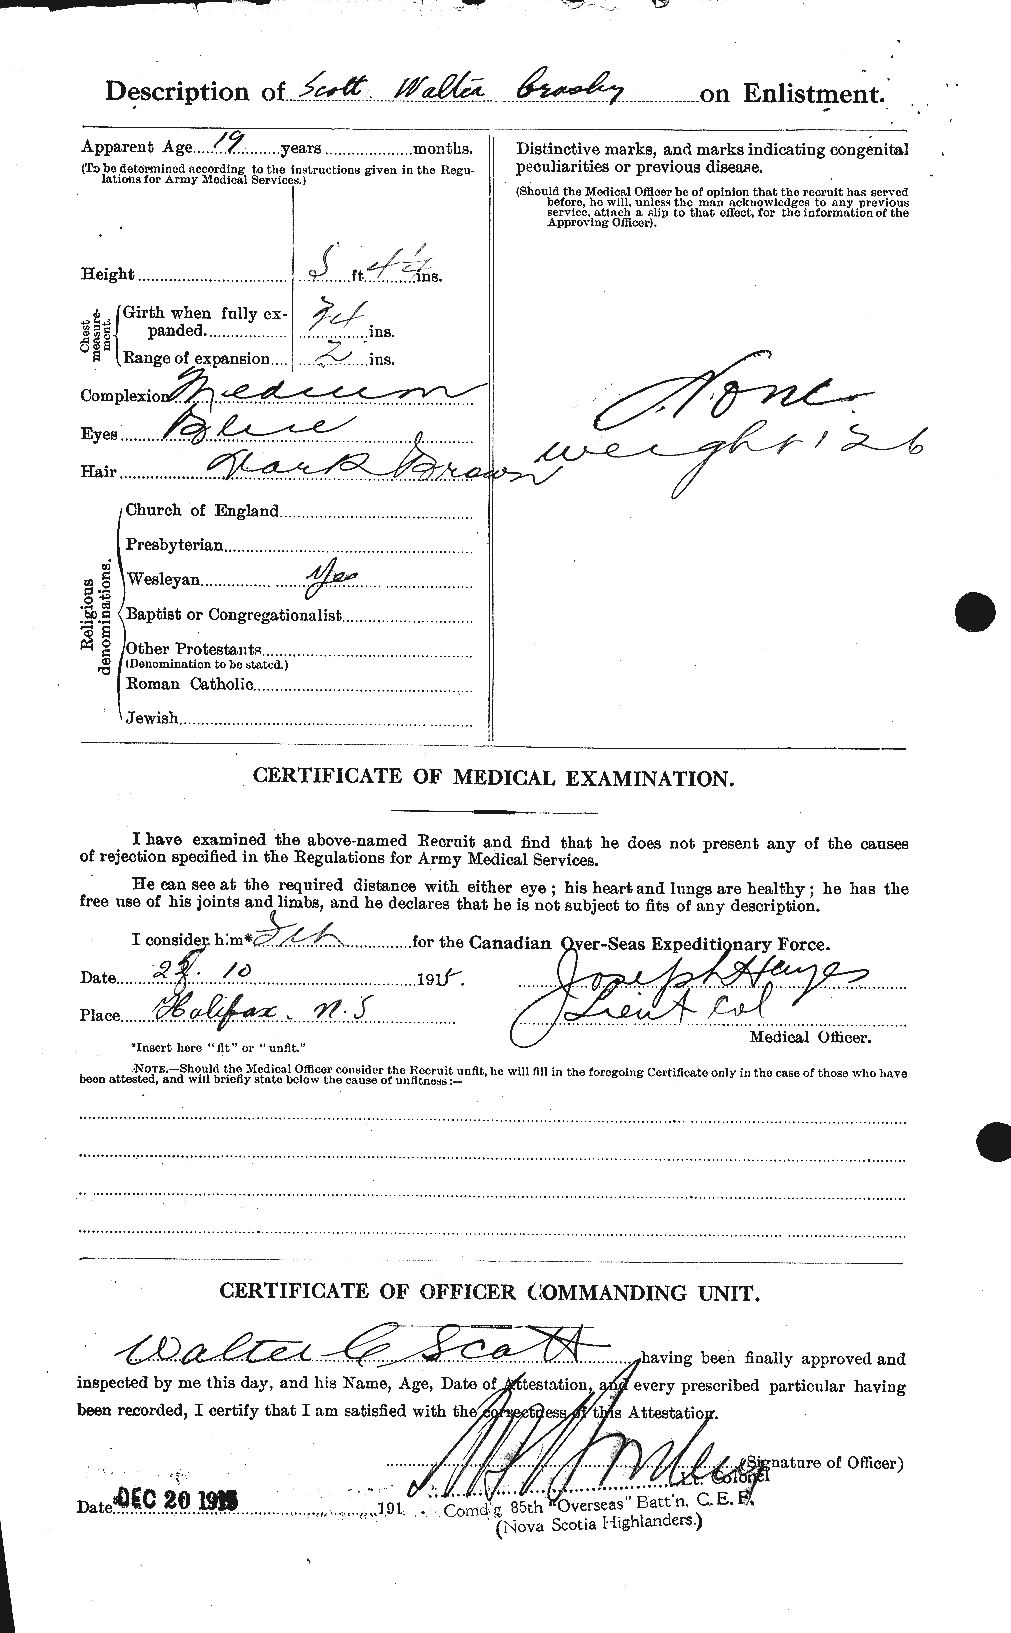 Personnel Records of the First World War - CEF 087998b